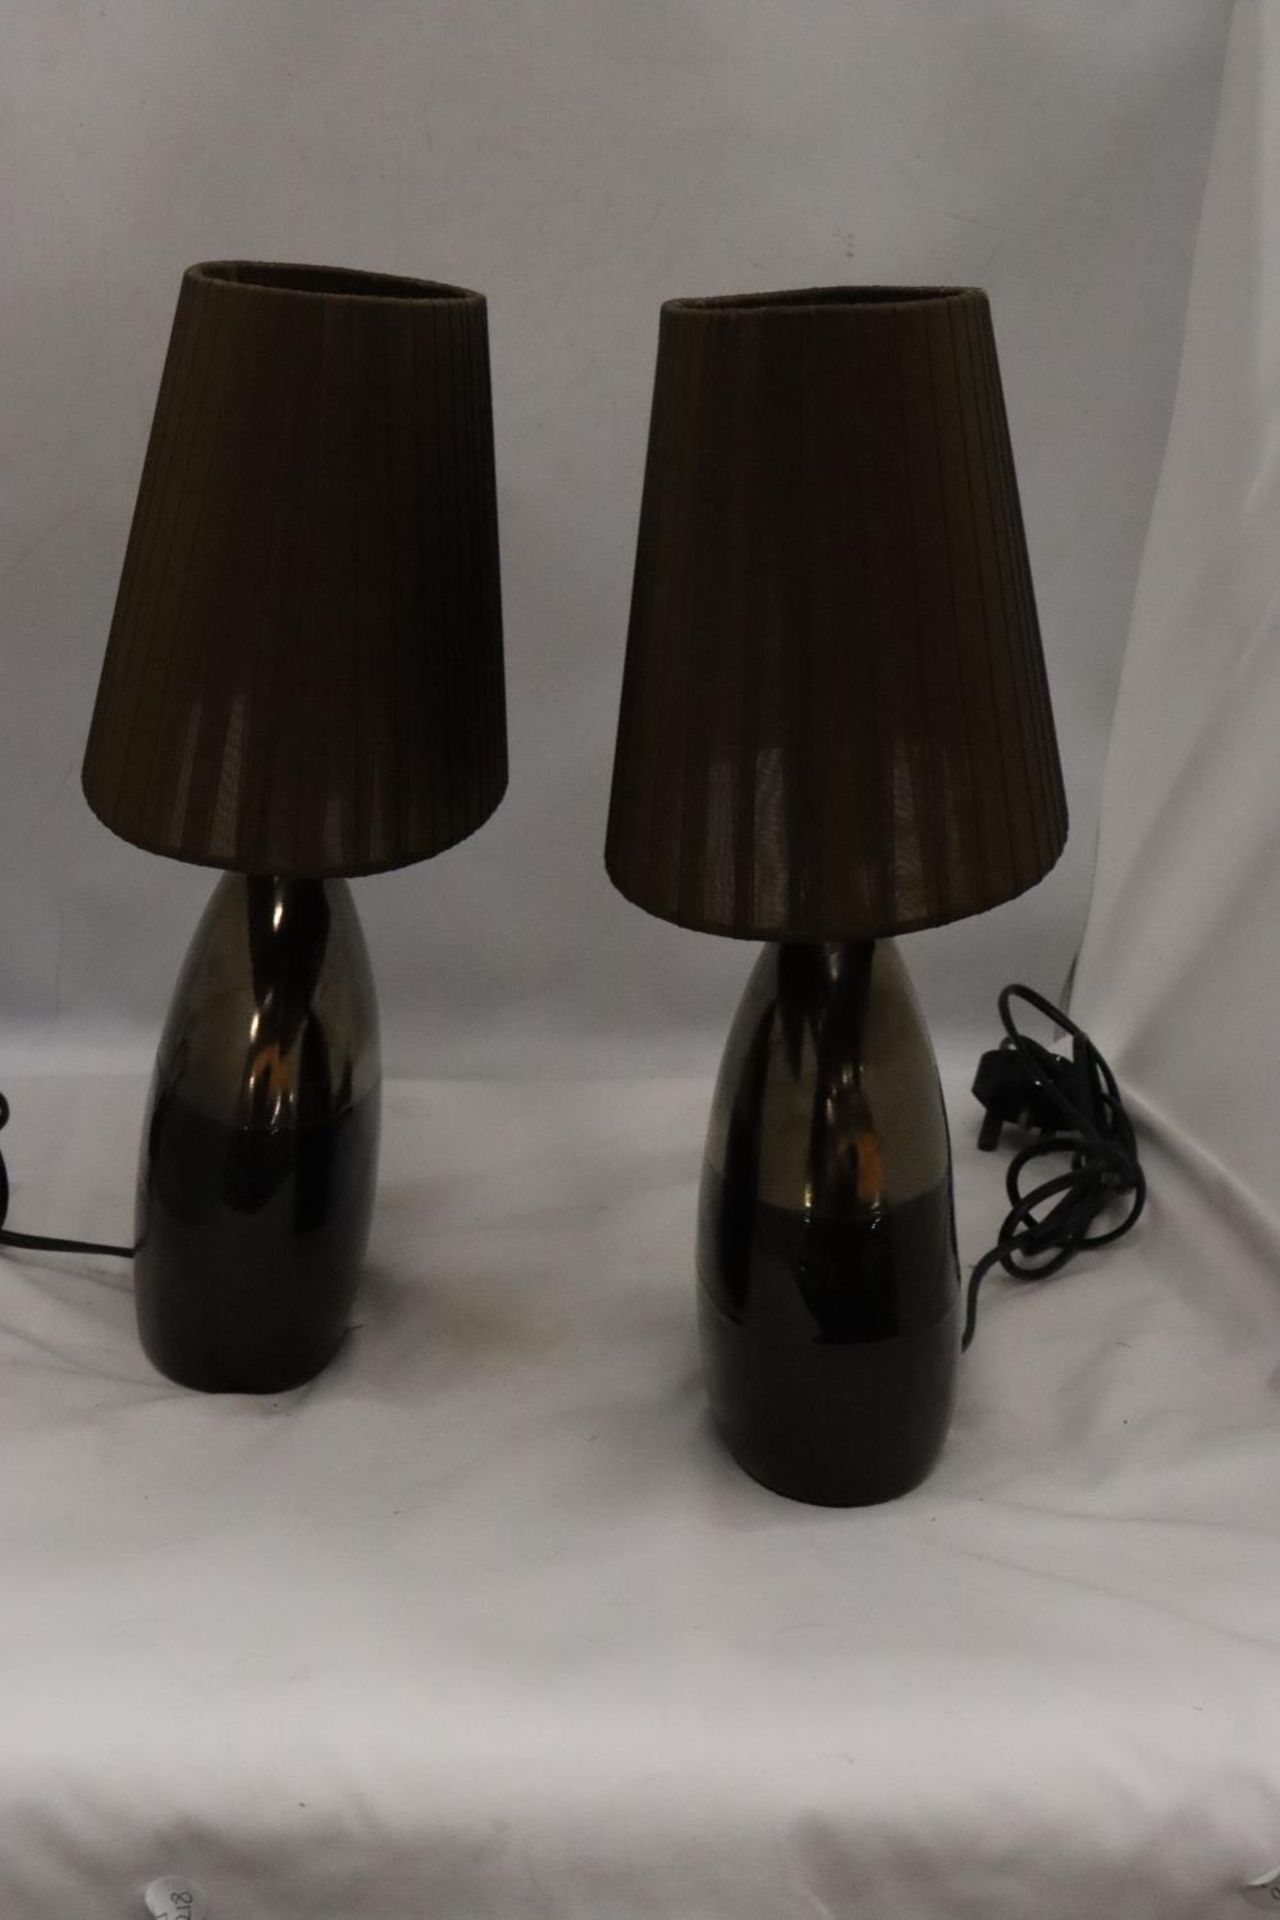 A PAIR OF MODERN TABLE LAMPS WITH SHADES - Image 3 of 4